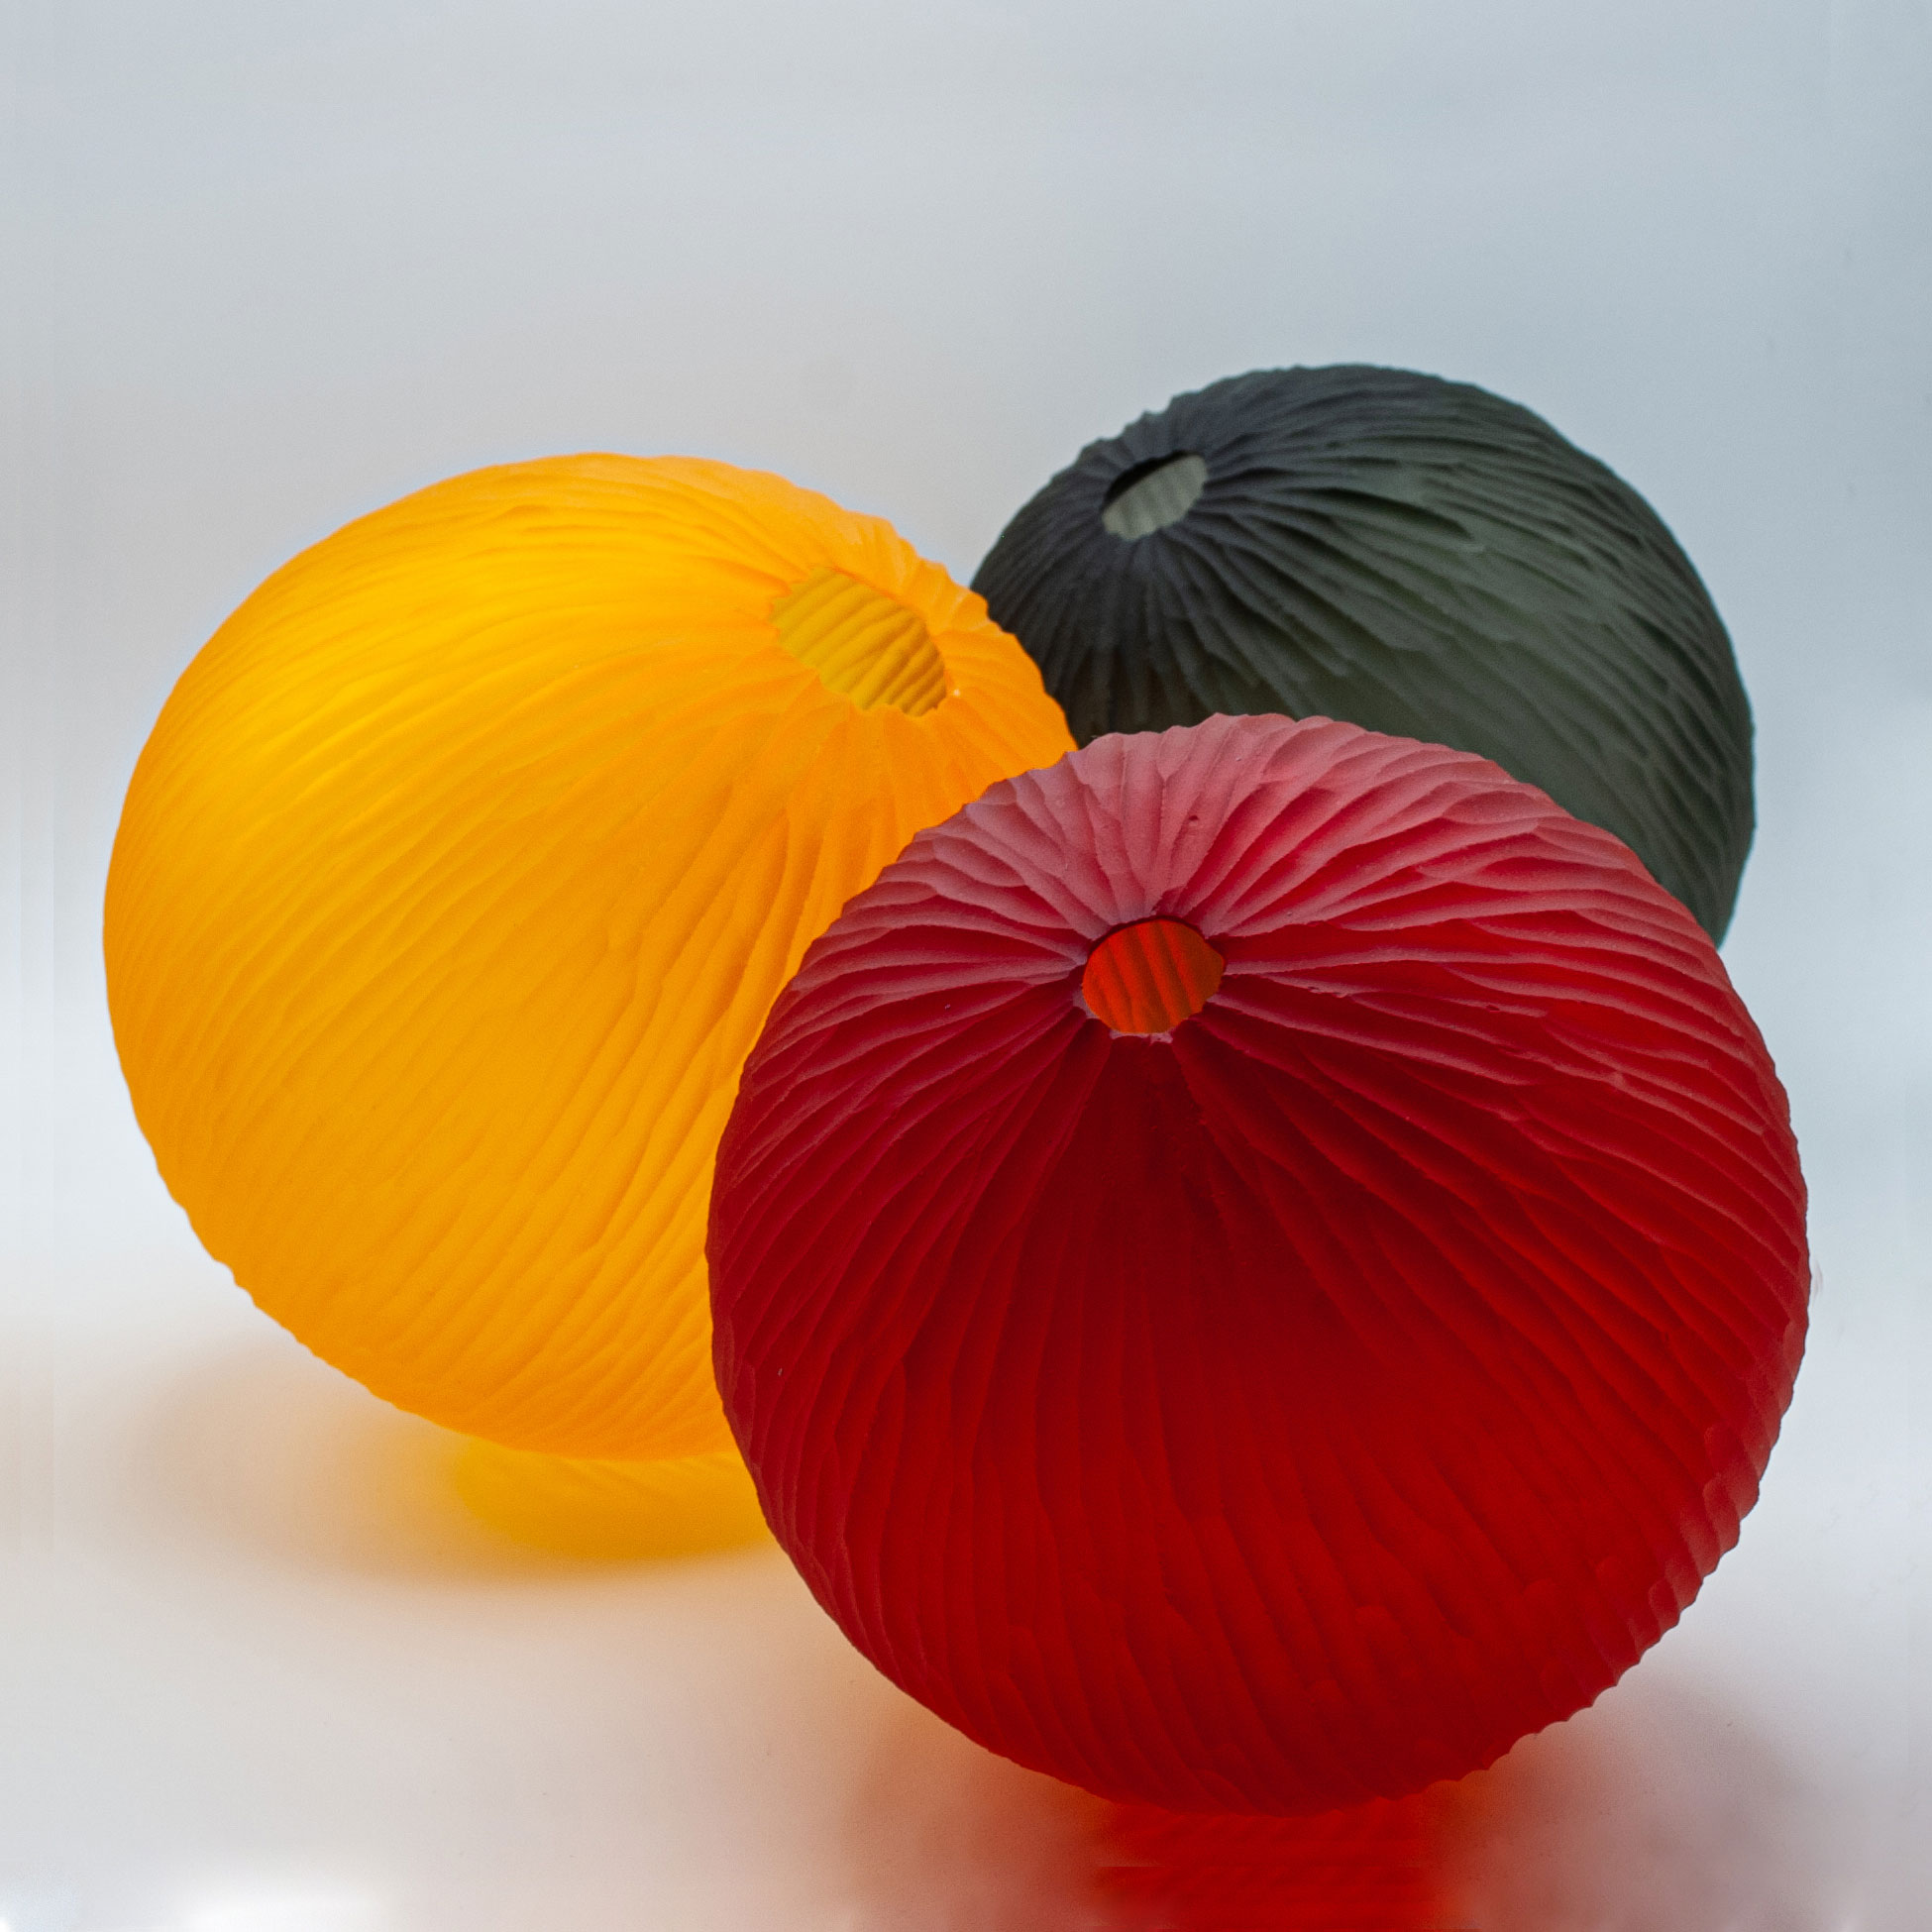 Three glass spheres in a row. One is yellow, one is red and one is black.